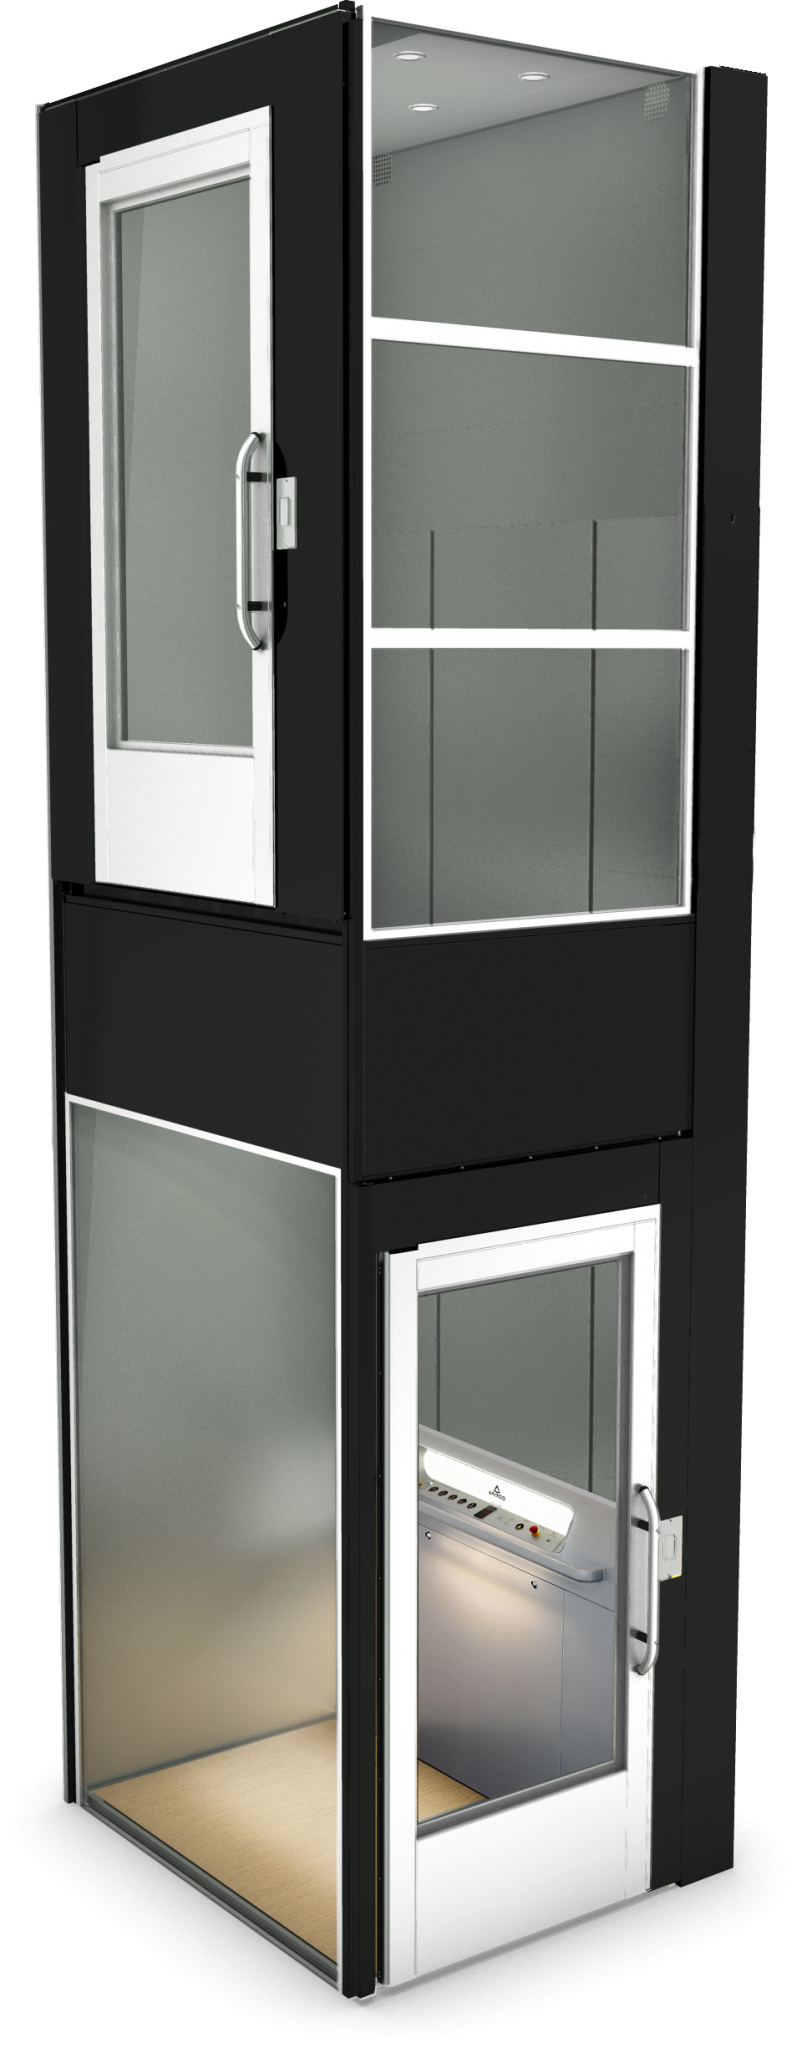 Aritco PublicLift Access cabin in black and glass with white doors